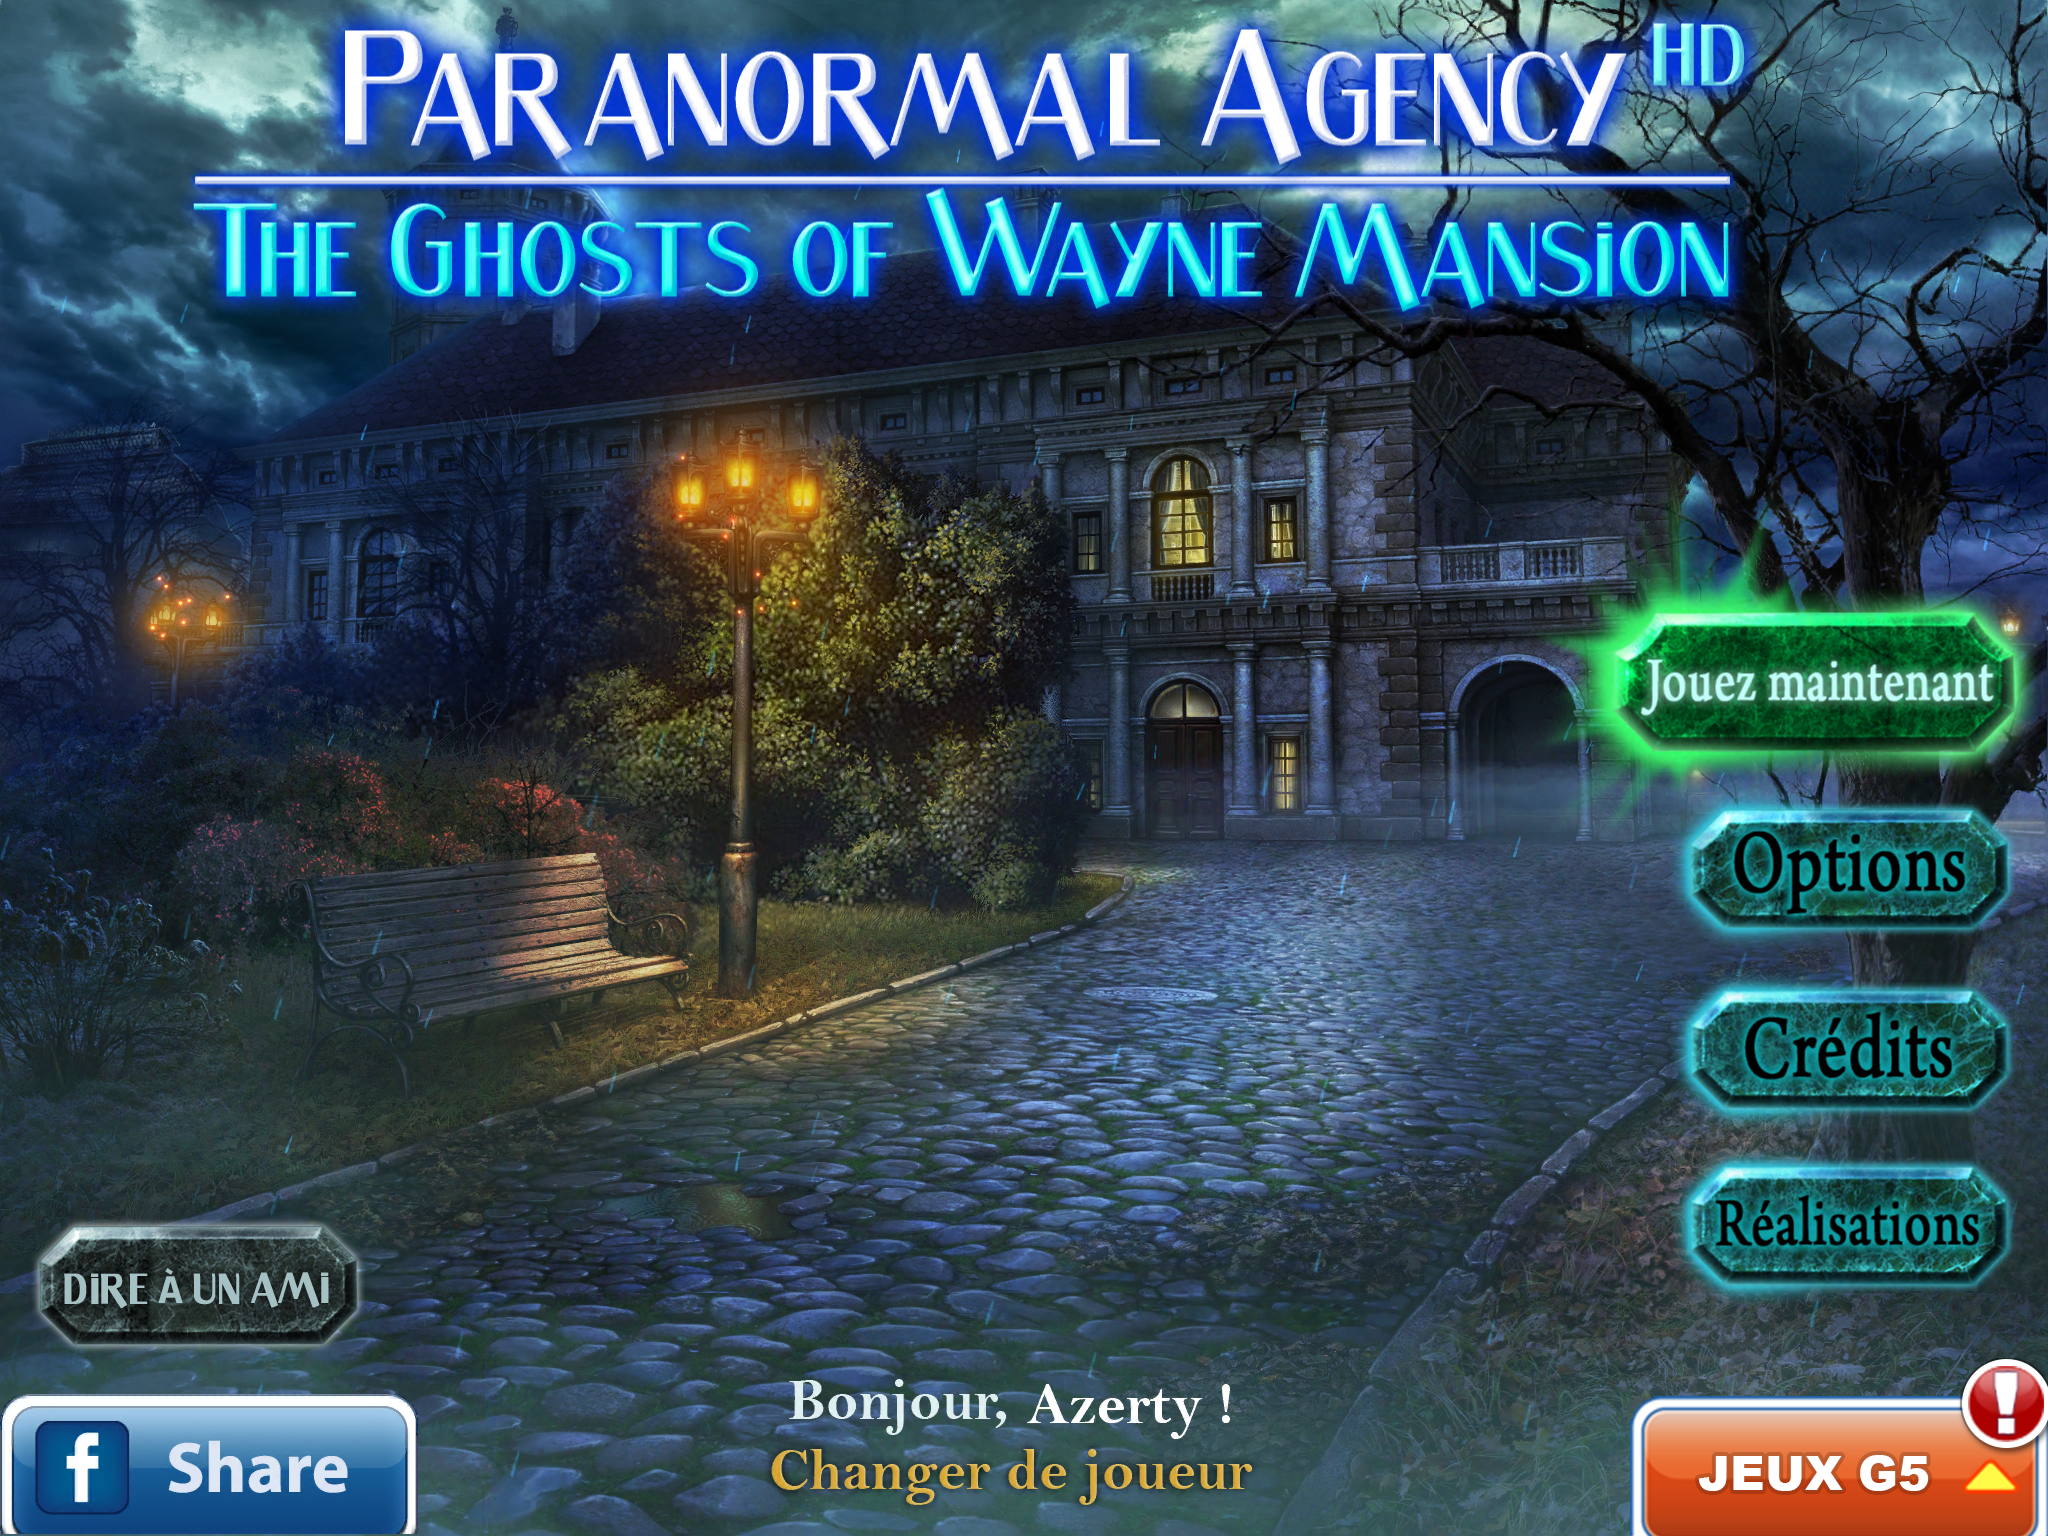 unlock codes for g5 games paranormal agency